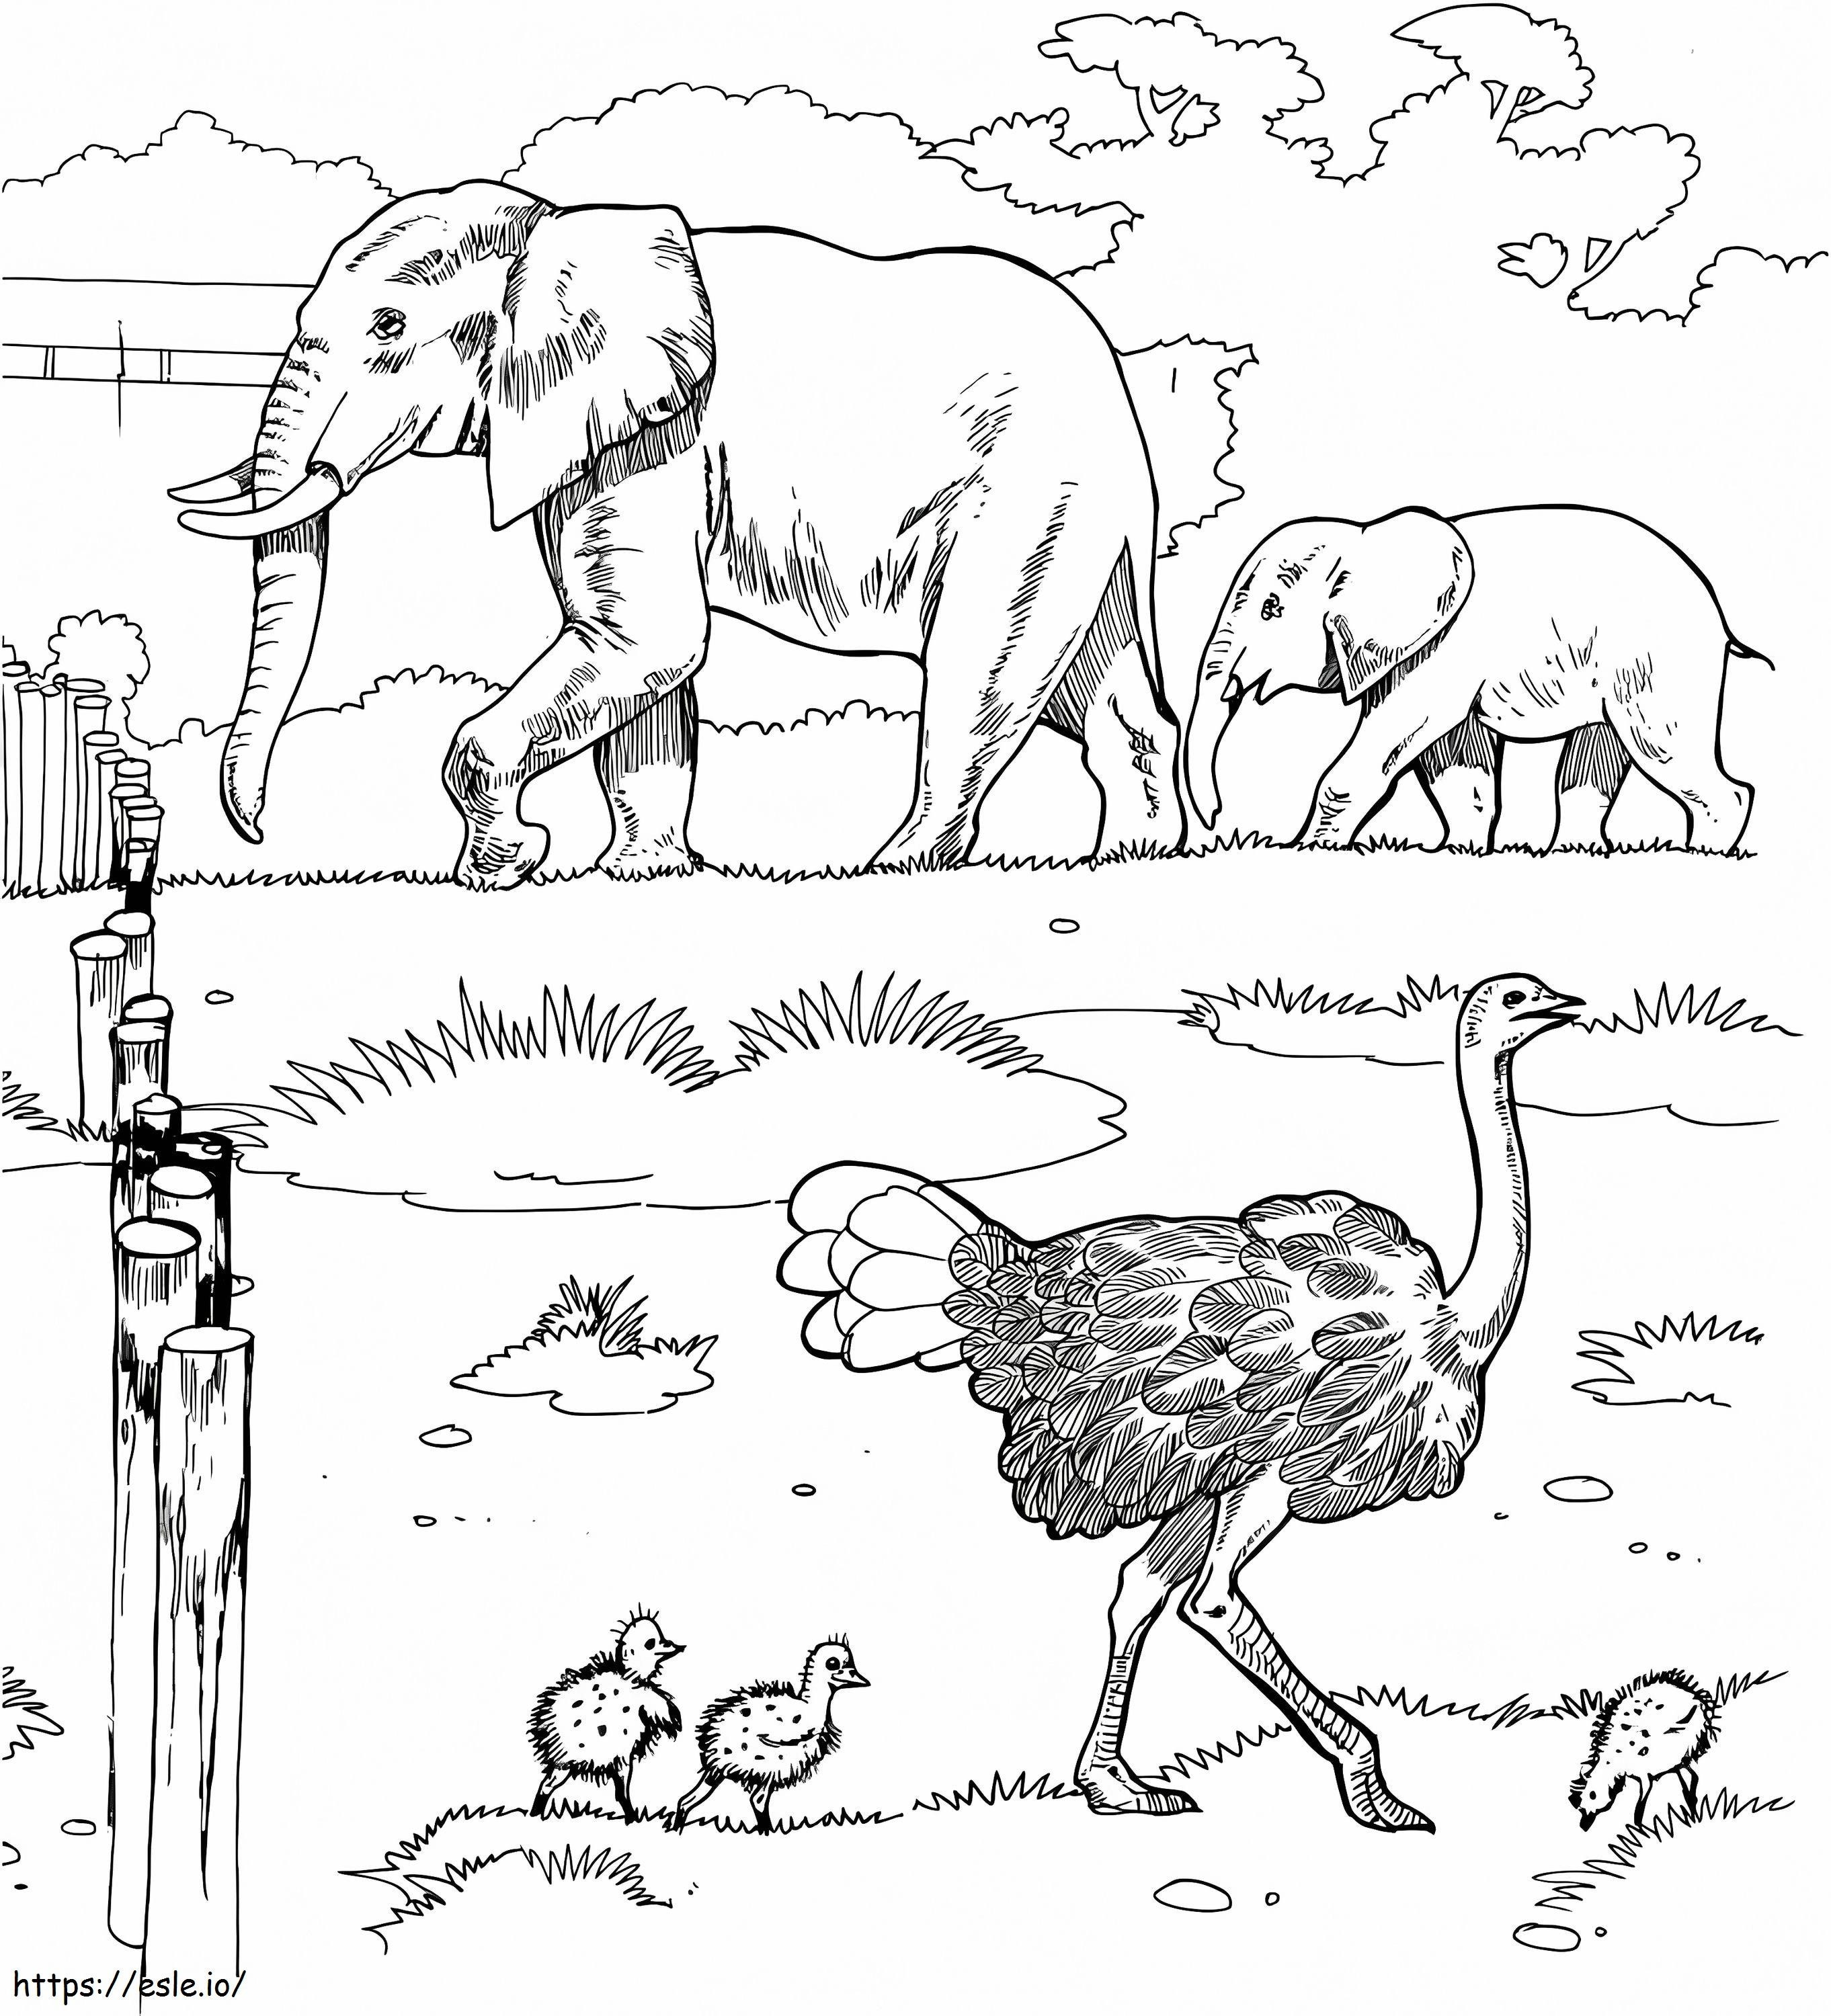 African Animals coloring page